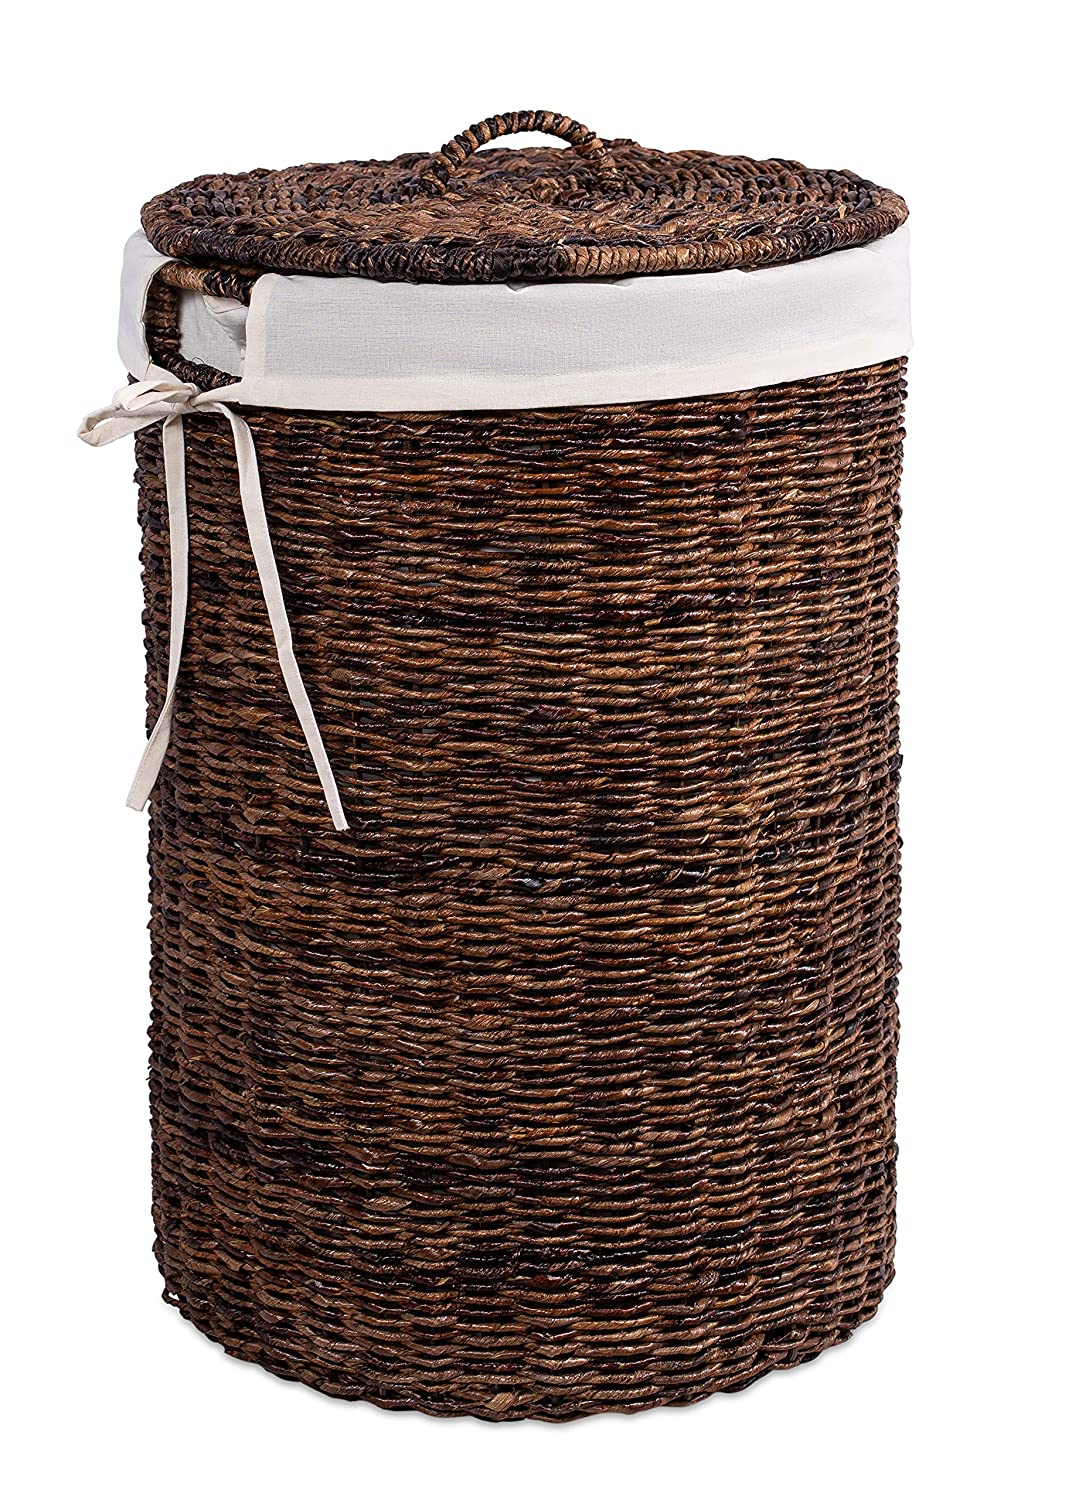 Wicker Basket Divided Interior Details about   BIRDROCK HOME Double Laundry Hamper w/ Lid 